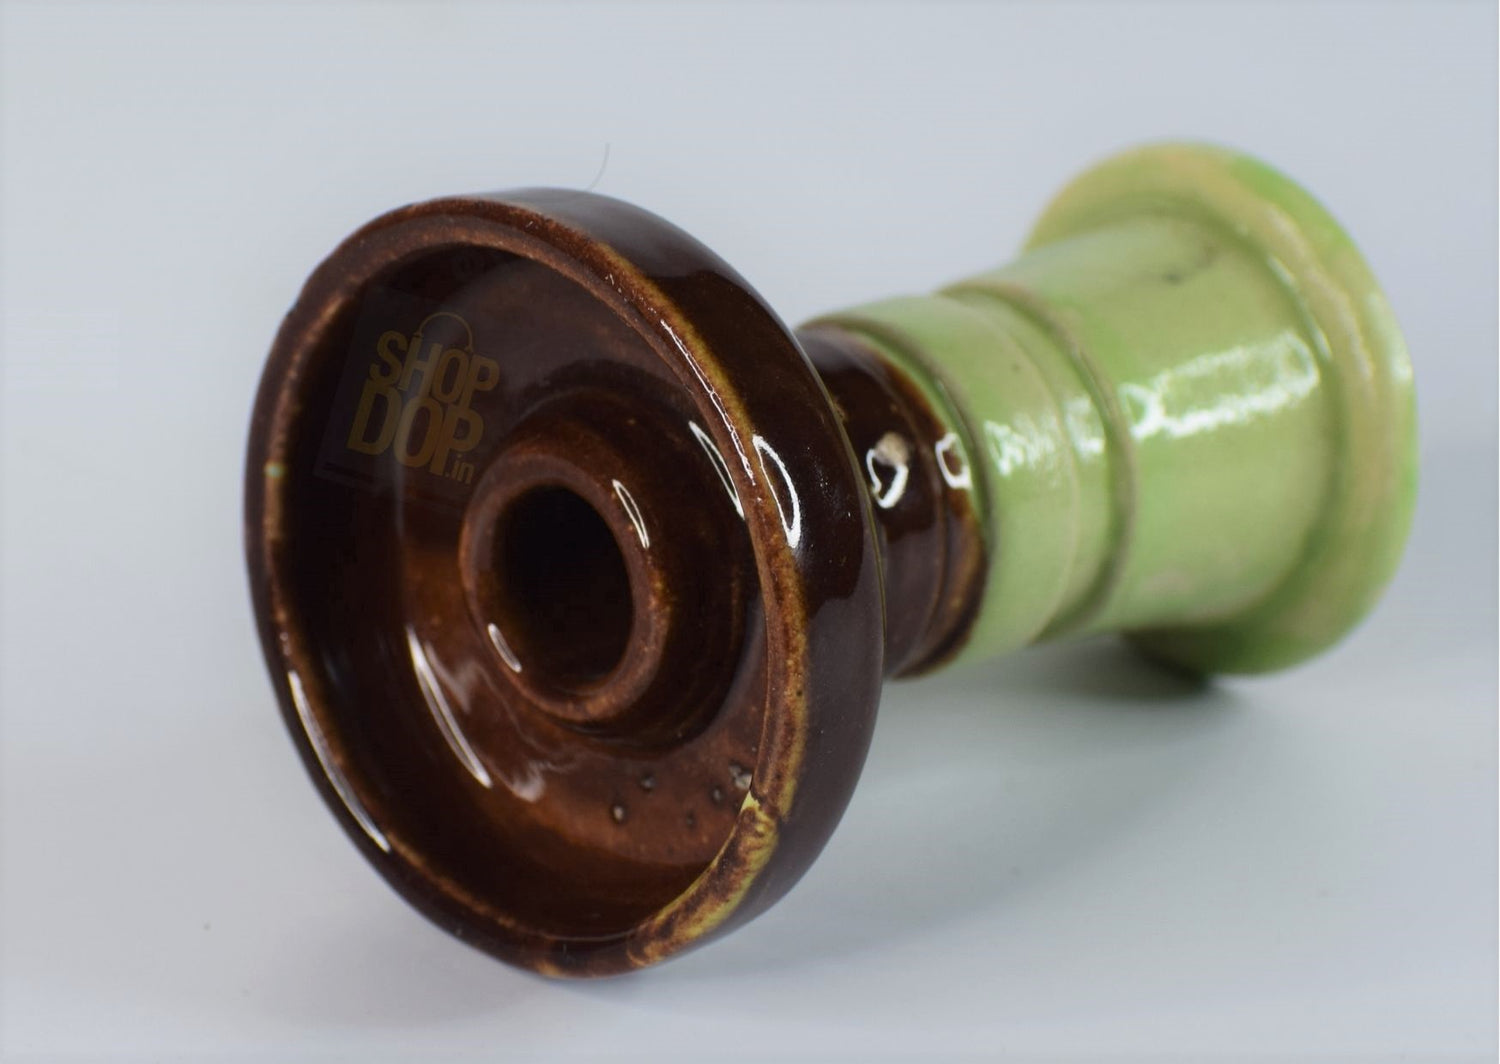 Ceramic Candy American Phunnel Hookah Bowl / Chillum - shopdop.in